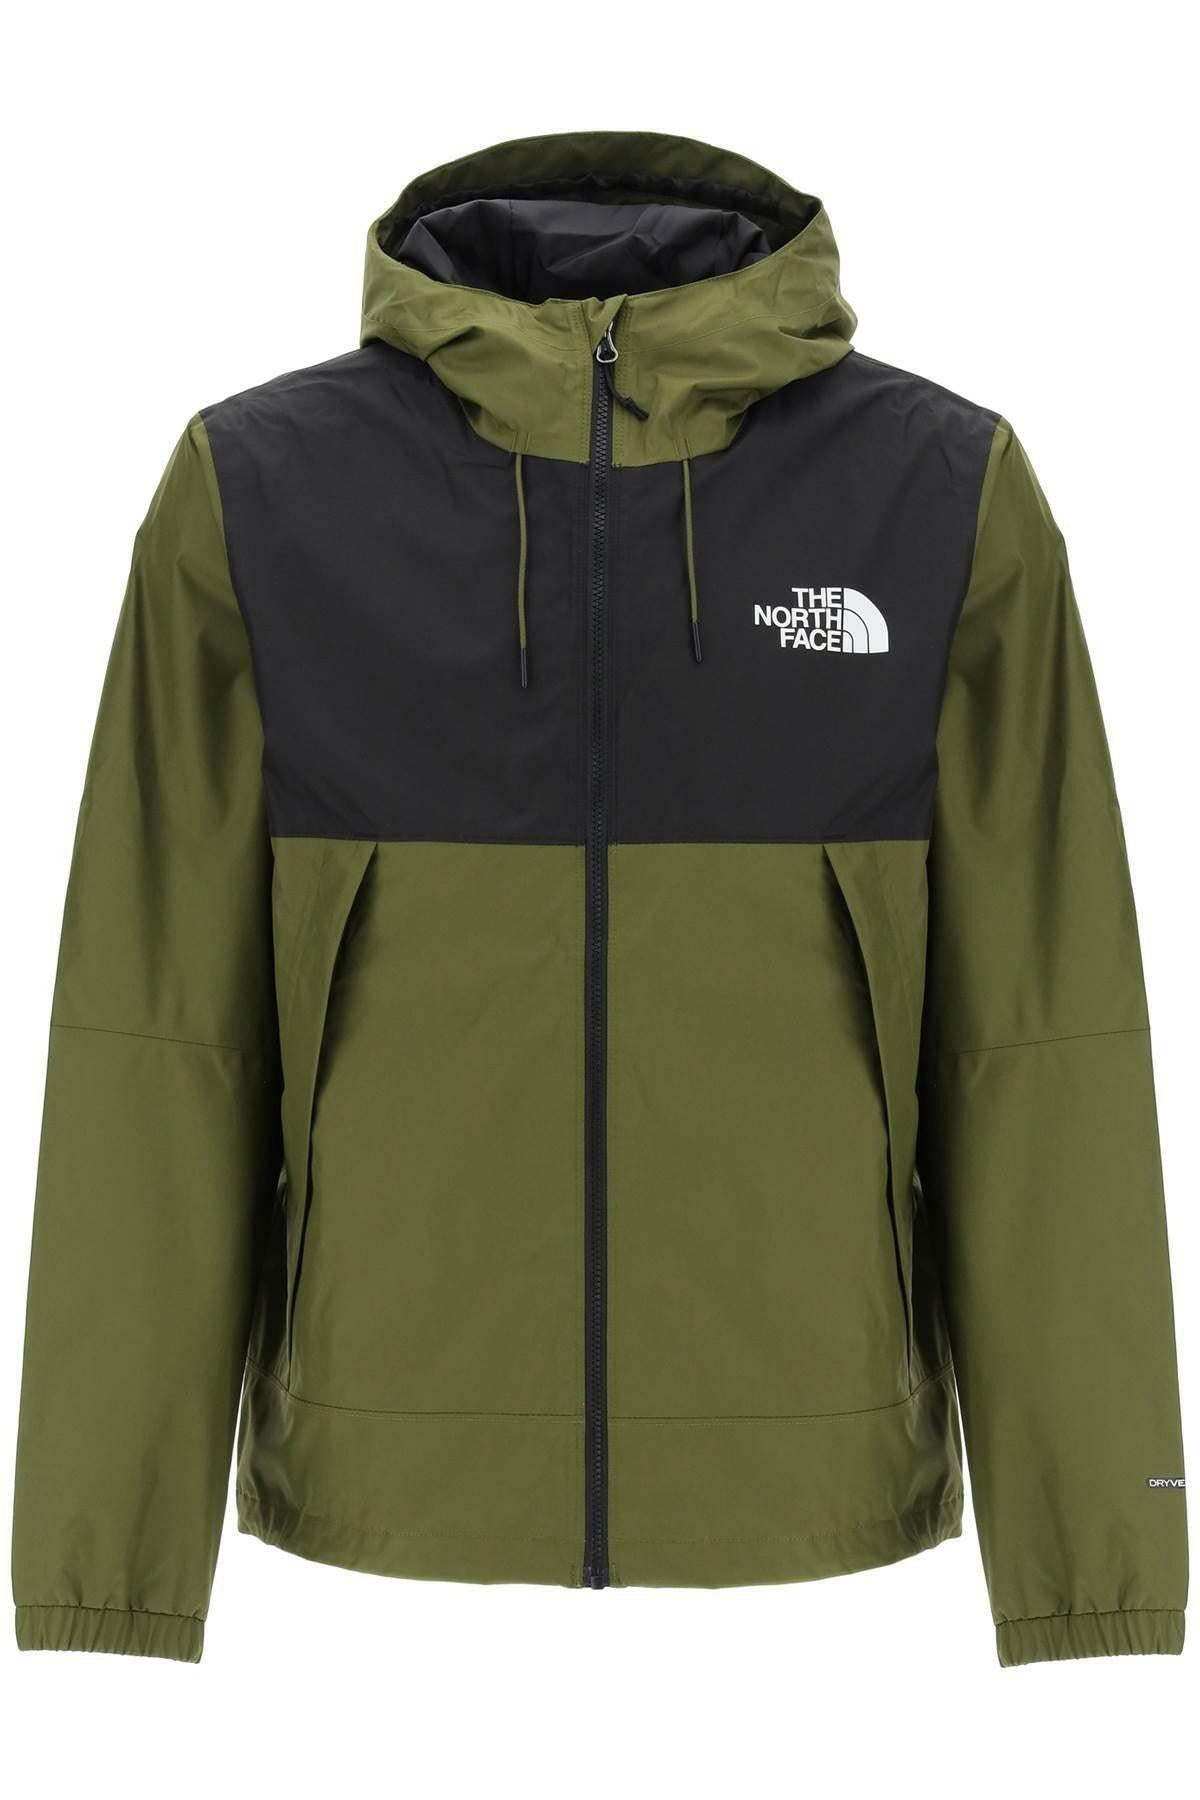 The North Face New Mountain Q Windbreaker Jacket